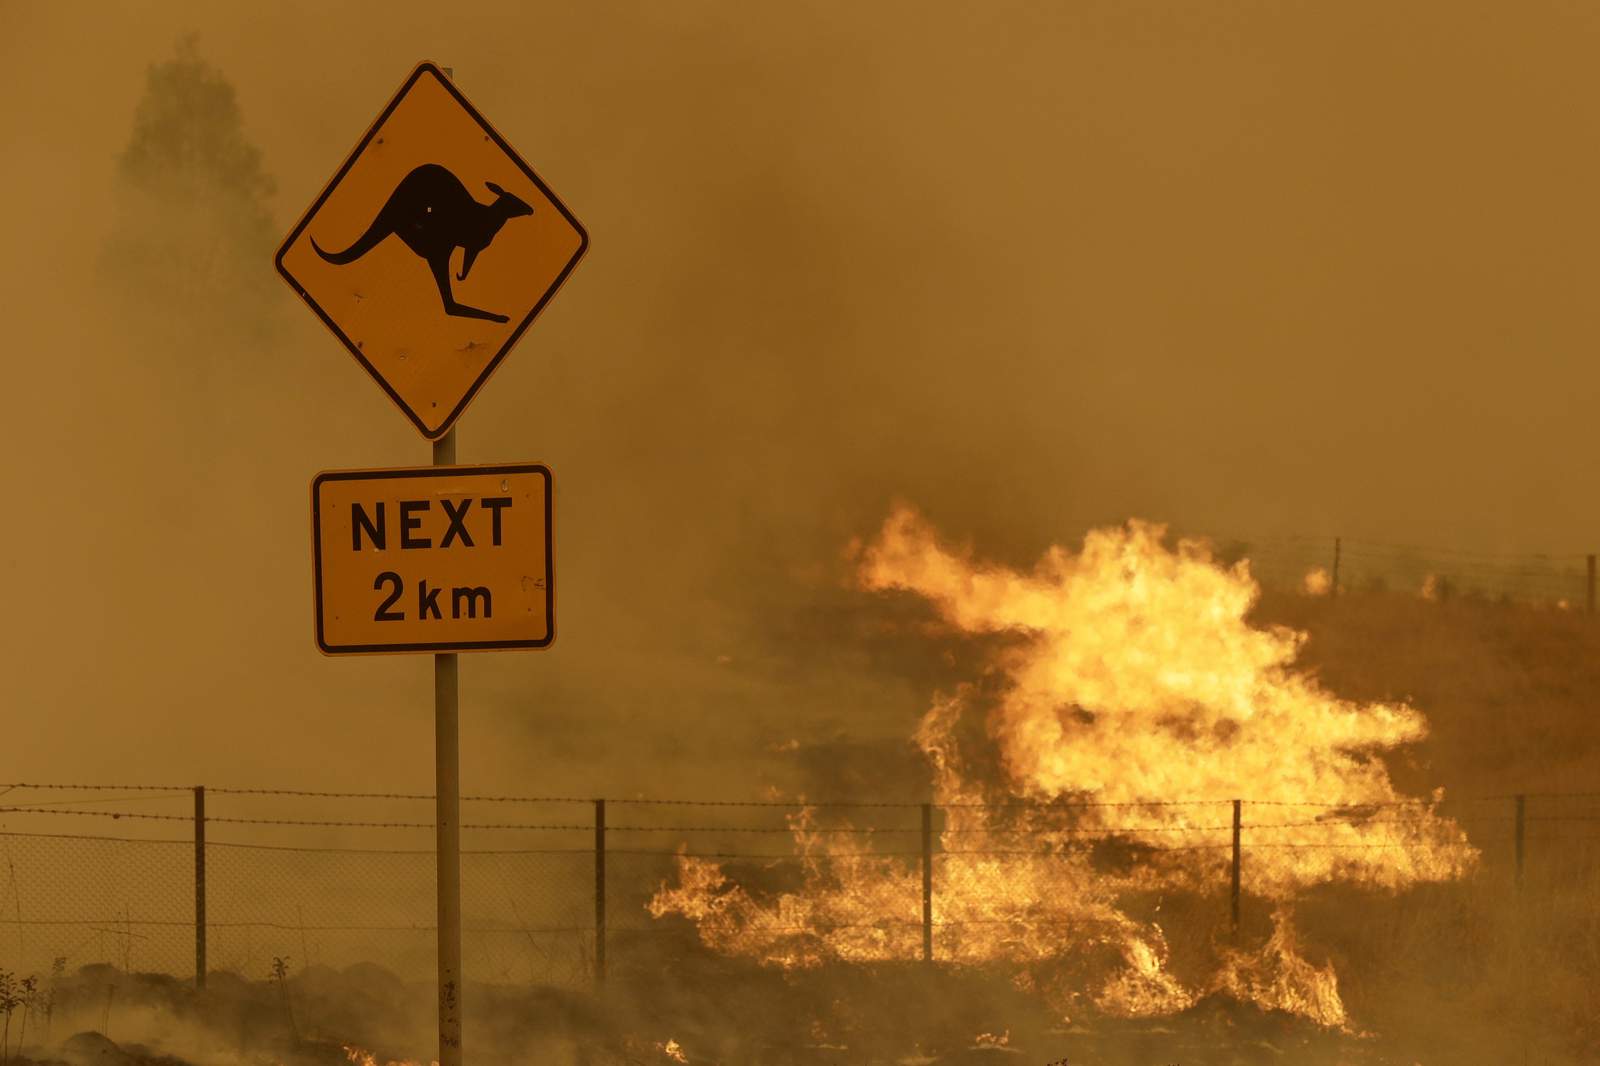 Australia sweltered through its 4th-hottest year in 2020